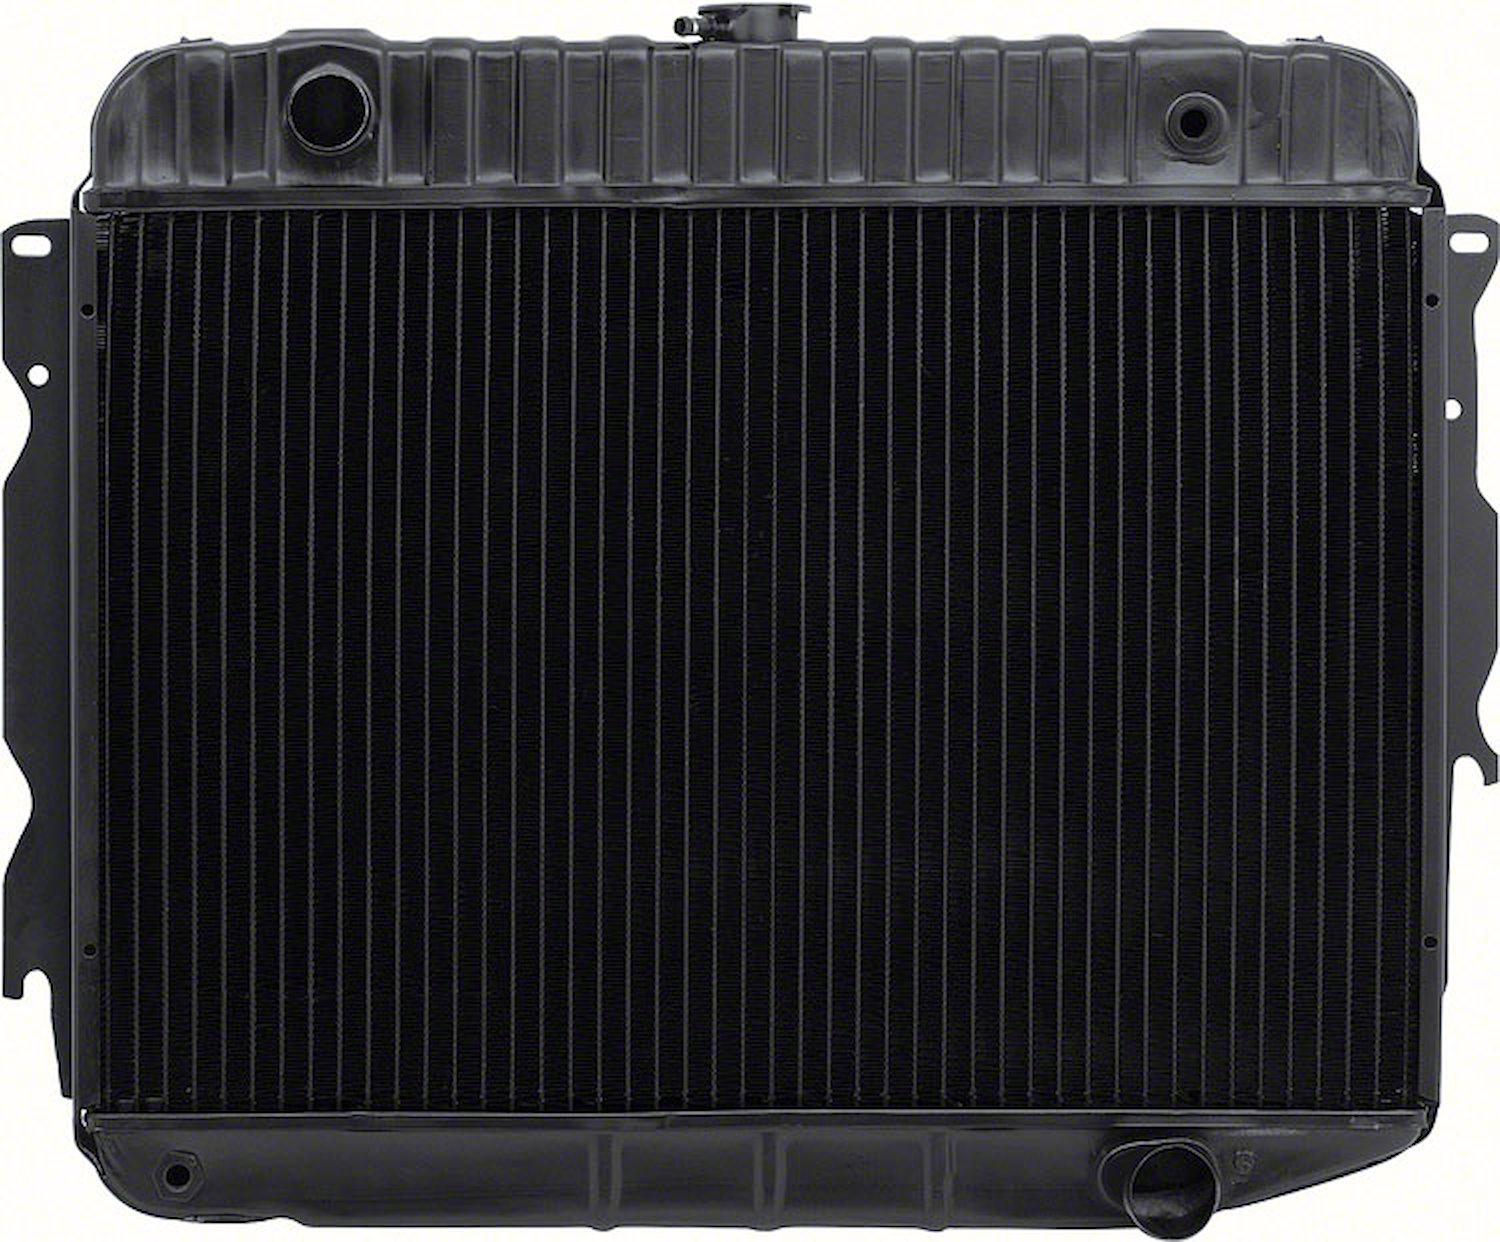 MD2293S Replacement Radiator 1973 Mopar B/E-Body Big Block V8 With Standard Trans 3 Row 22" Wide